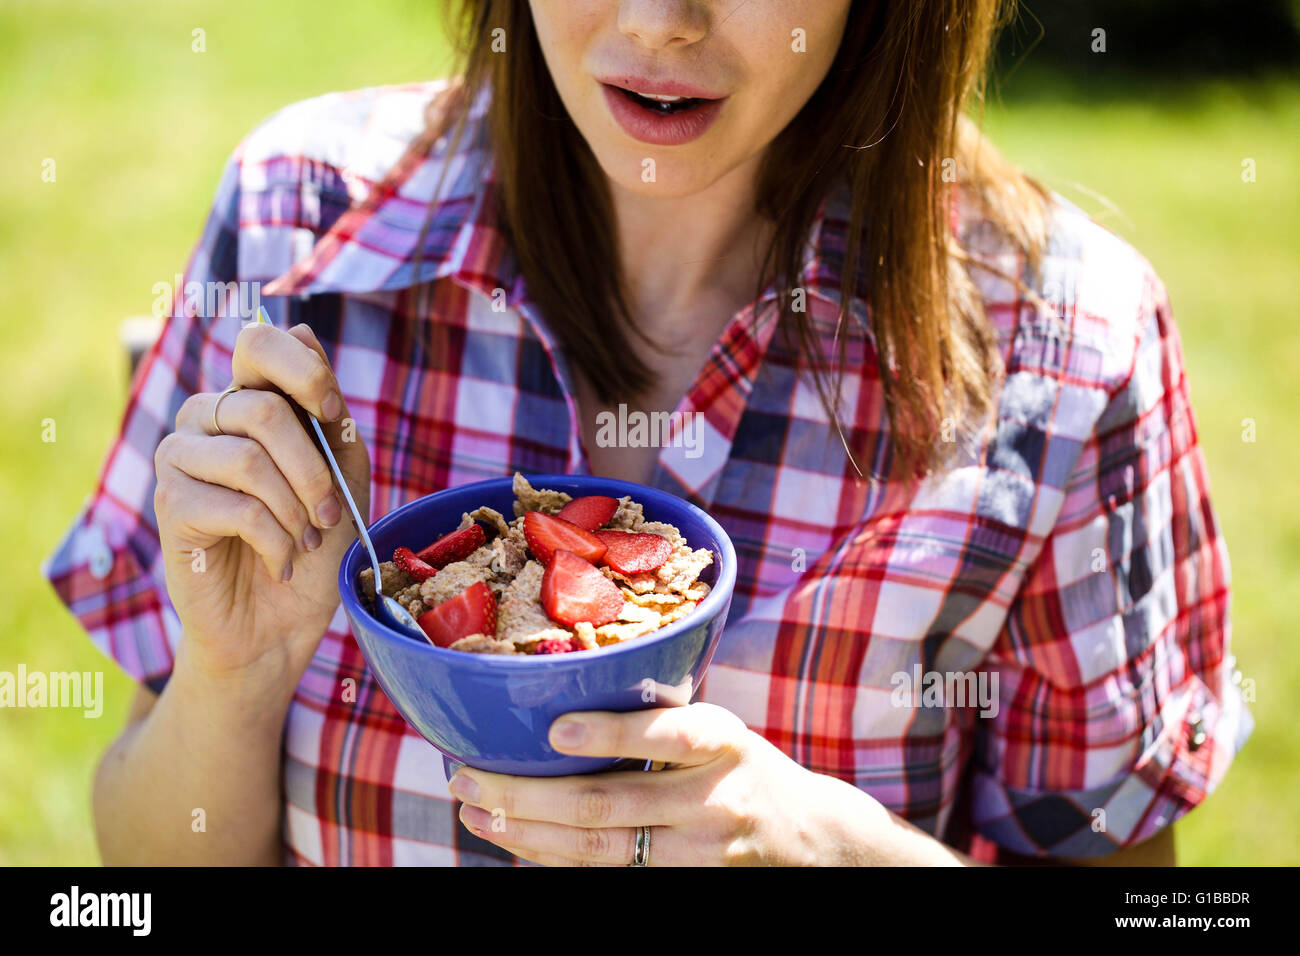 Portrait of a Woman Outside Eating Healthy Breakfast Cereals with Fresh Strawberries Fruit Stock Photo